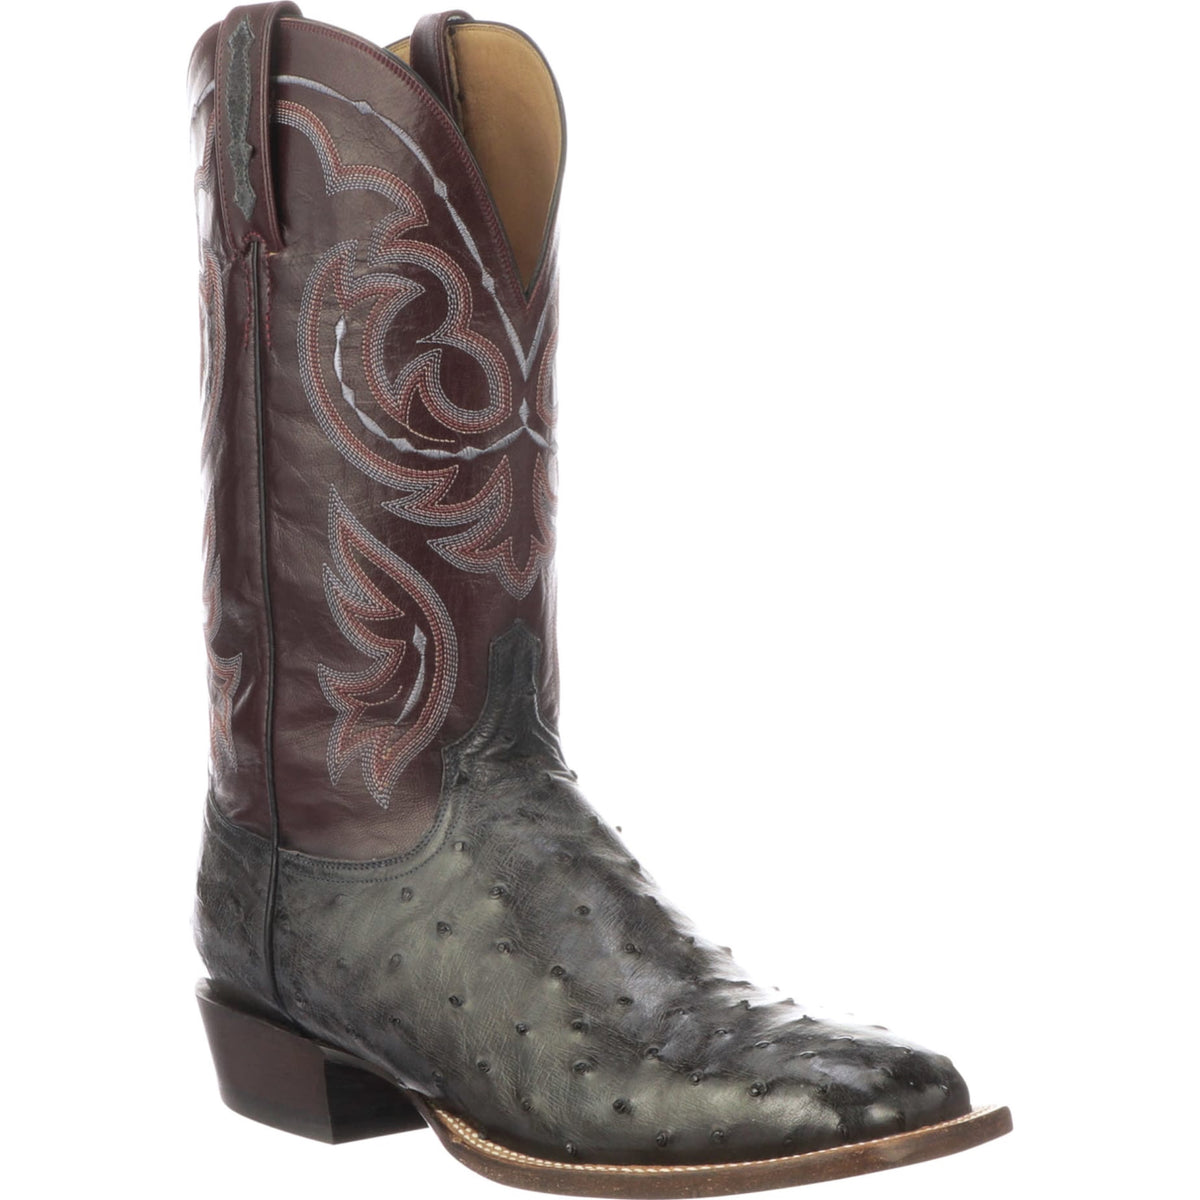 MEN’S LUCCHESE HARRIS - ANTIQUE ANTHRACITE GREY FULL QUILL OSTRICH BOOTS - El Toro Boots